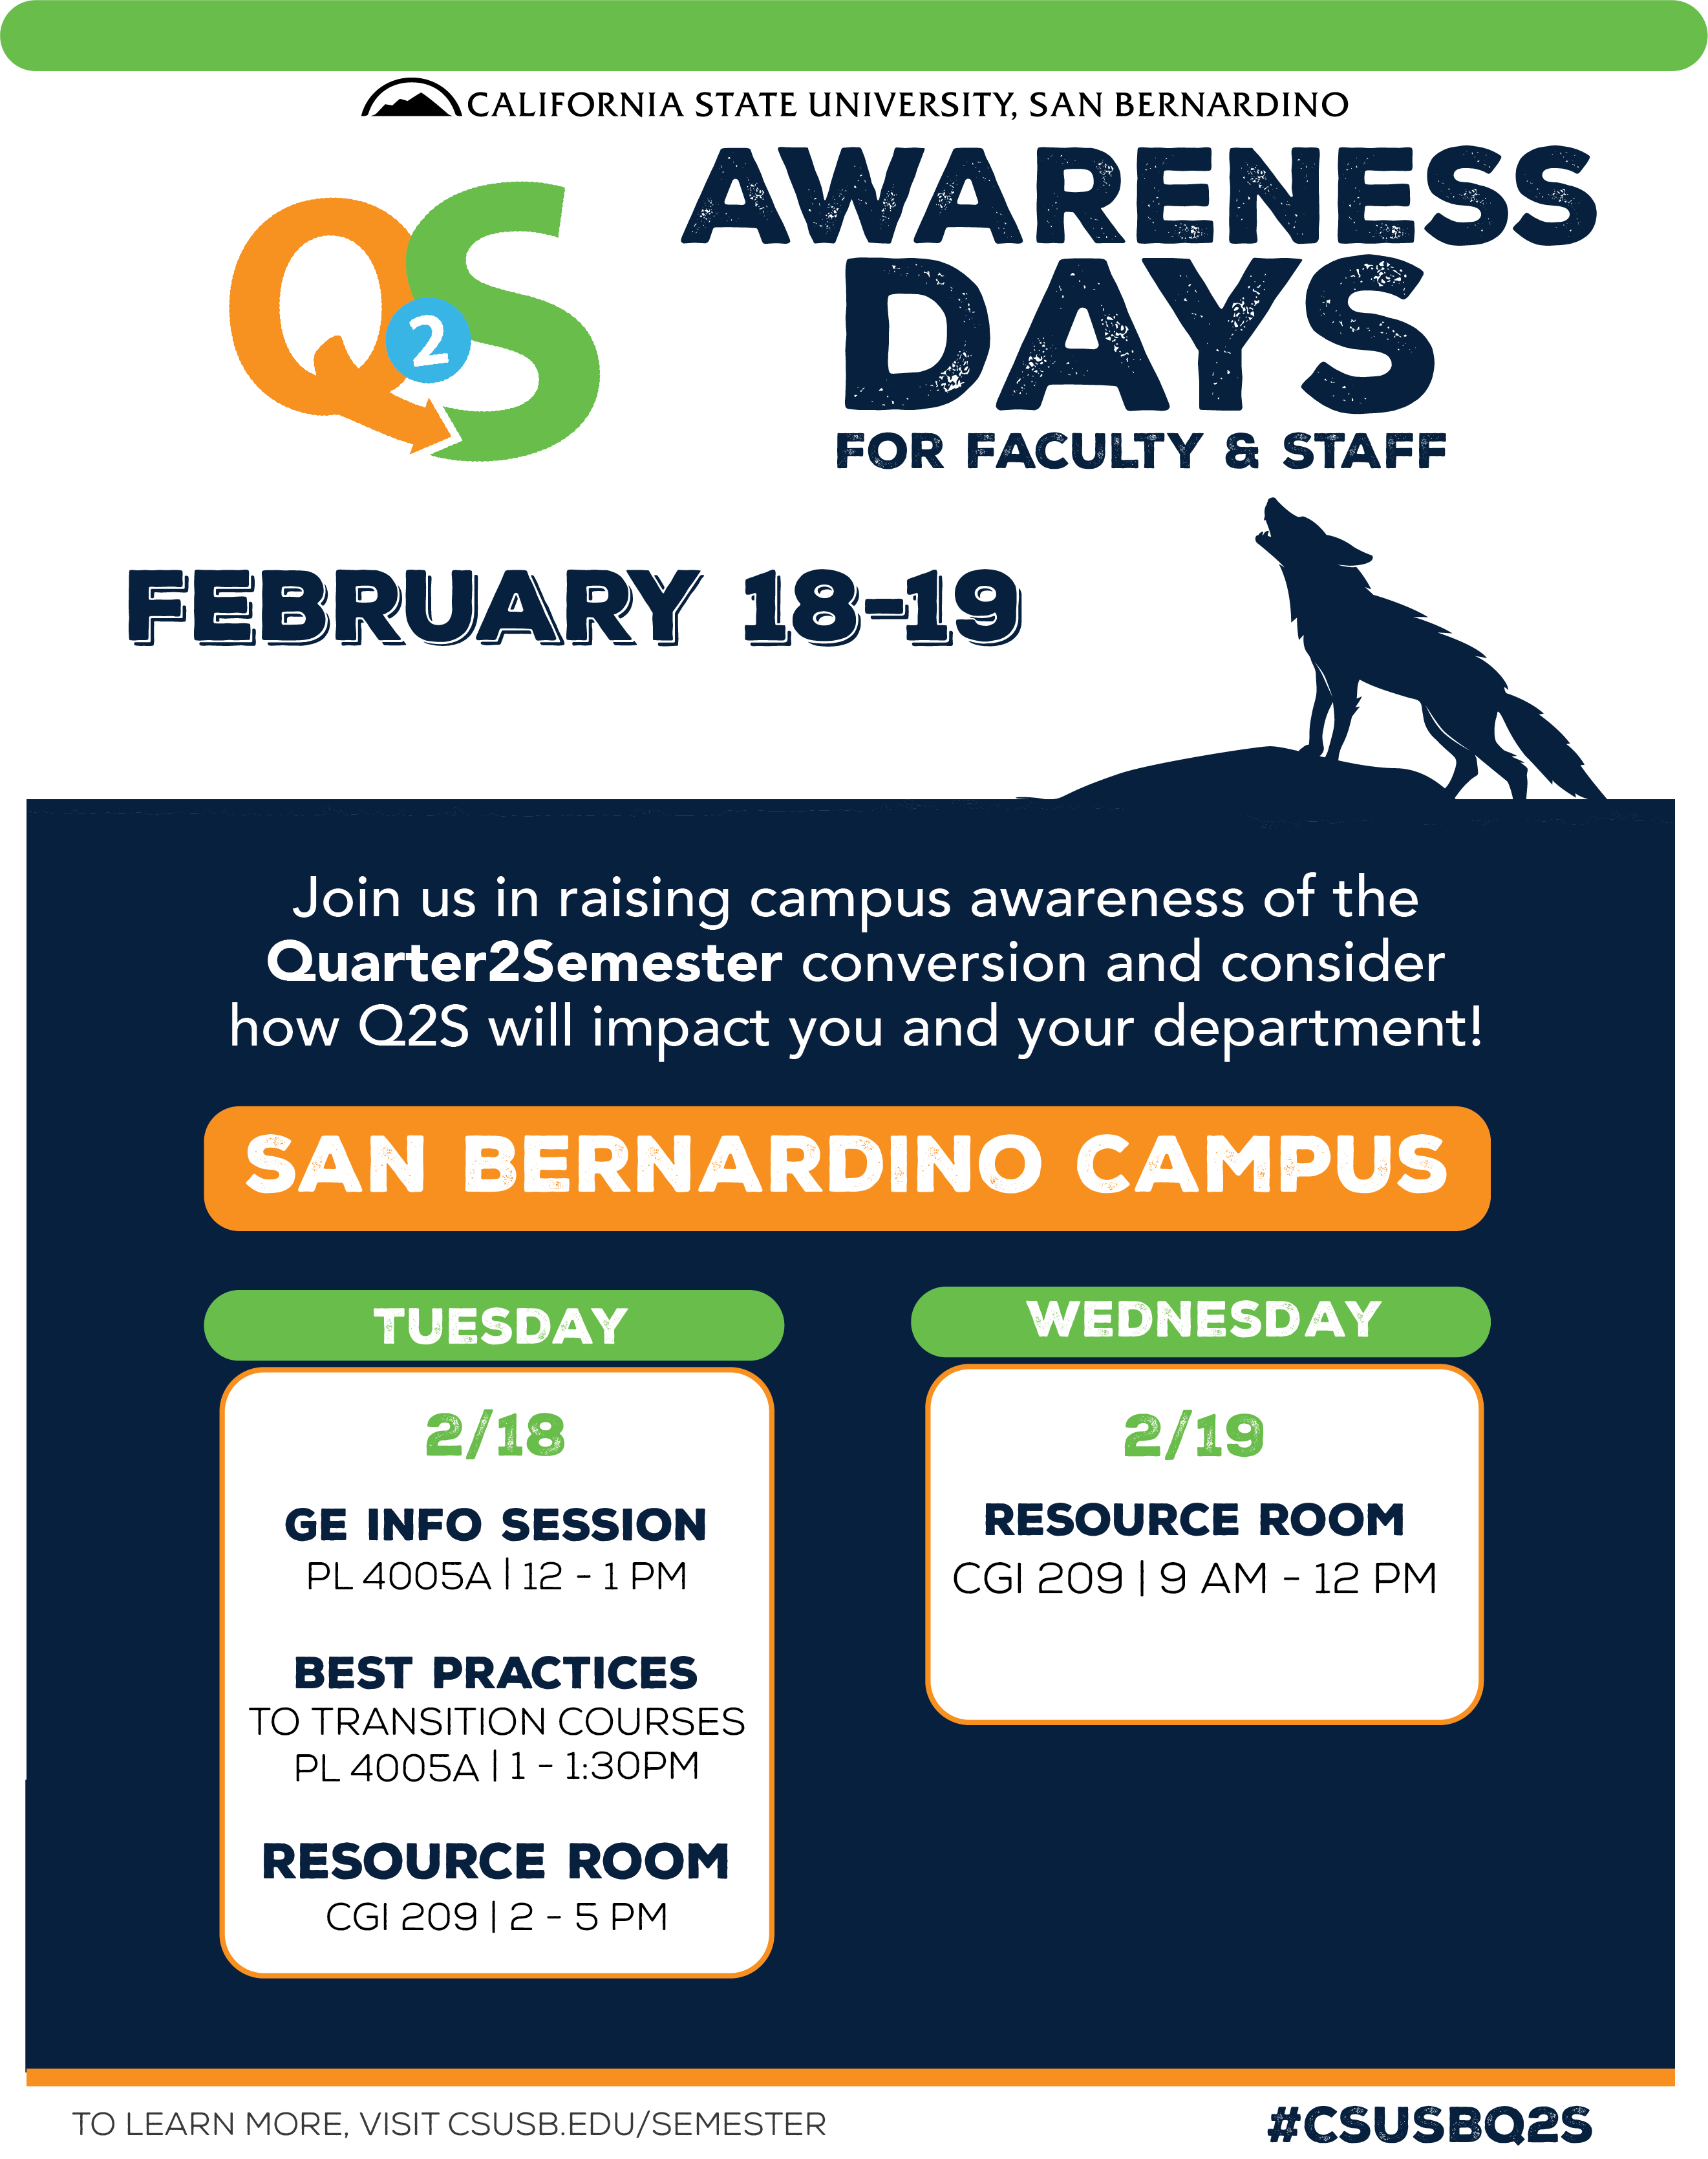 Q2S Awareness Days for Faculty & Staff February 18-19. Tuesday, GE Info Session PL-4005A from 12-1pm; Best Practices to Transition Courses PL-4005A from 1-1:30pm; Resource Room CGI-209 from 2-5pm. Wednesday, Resource Room CGI-209 from 9am-12pm.